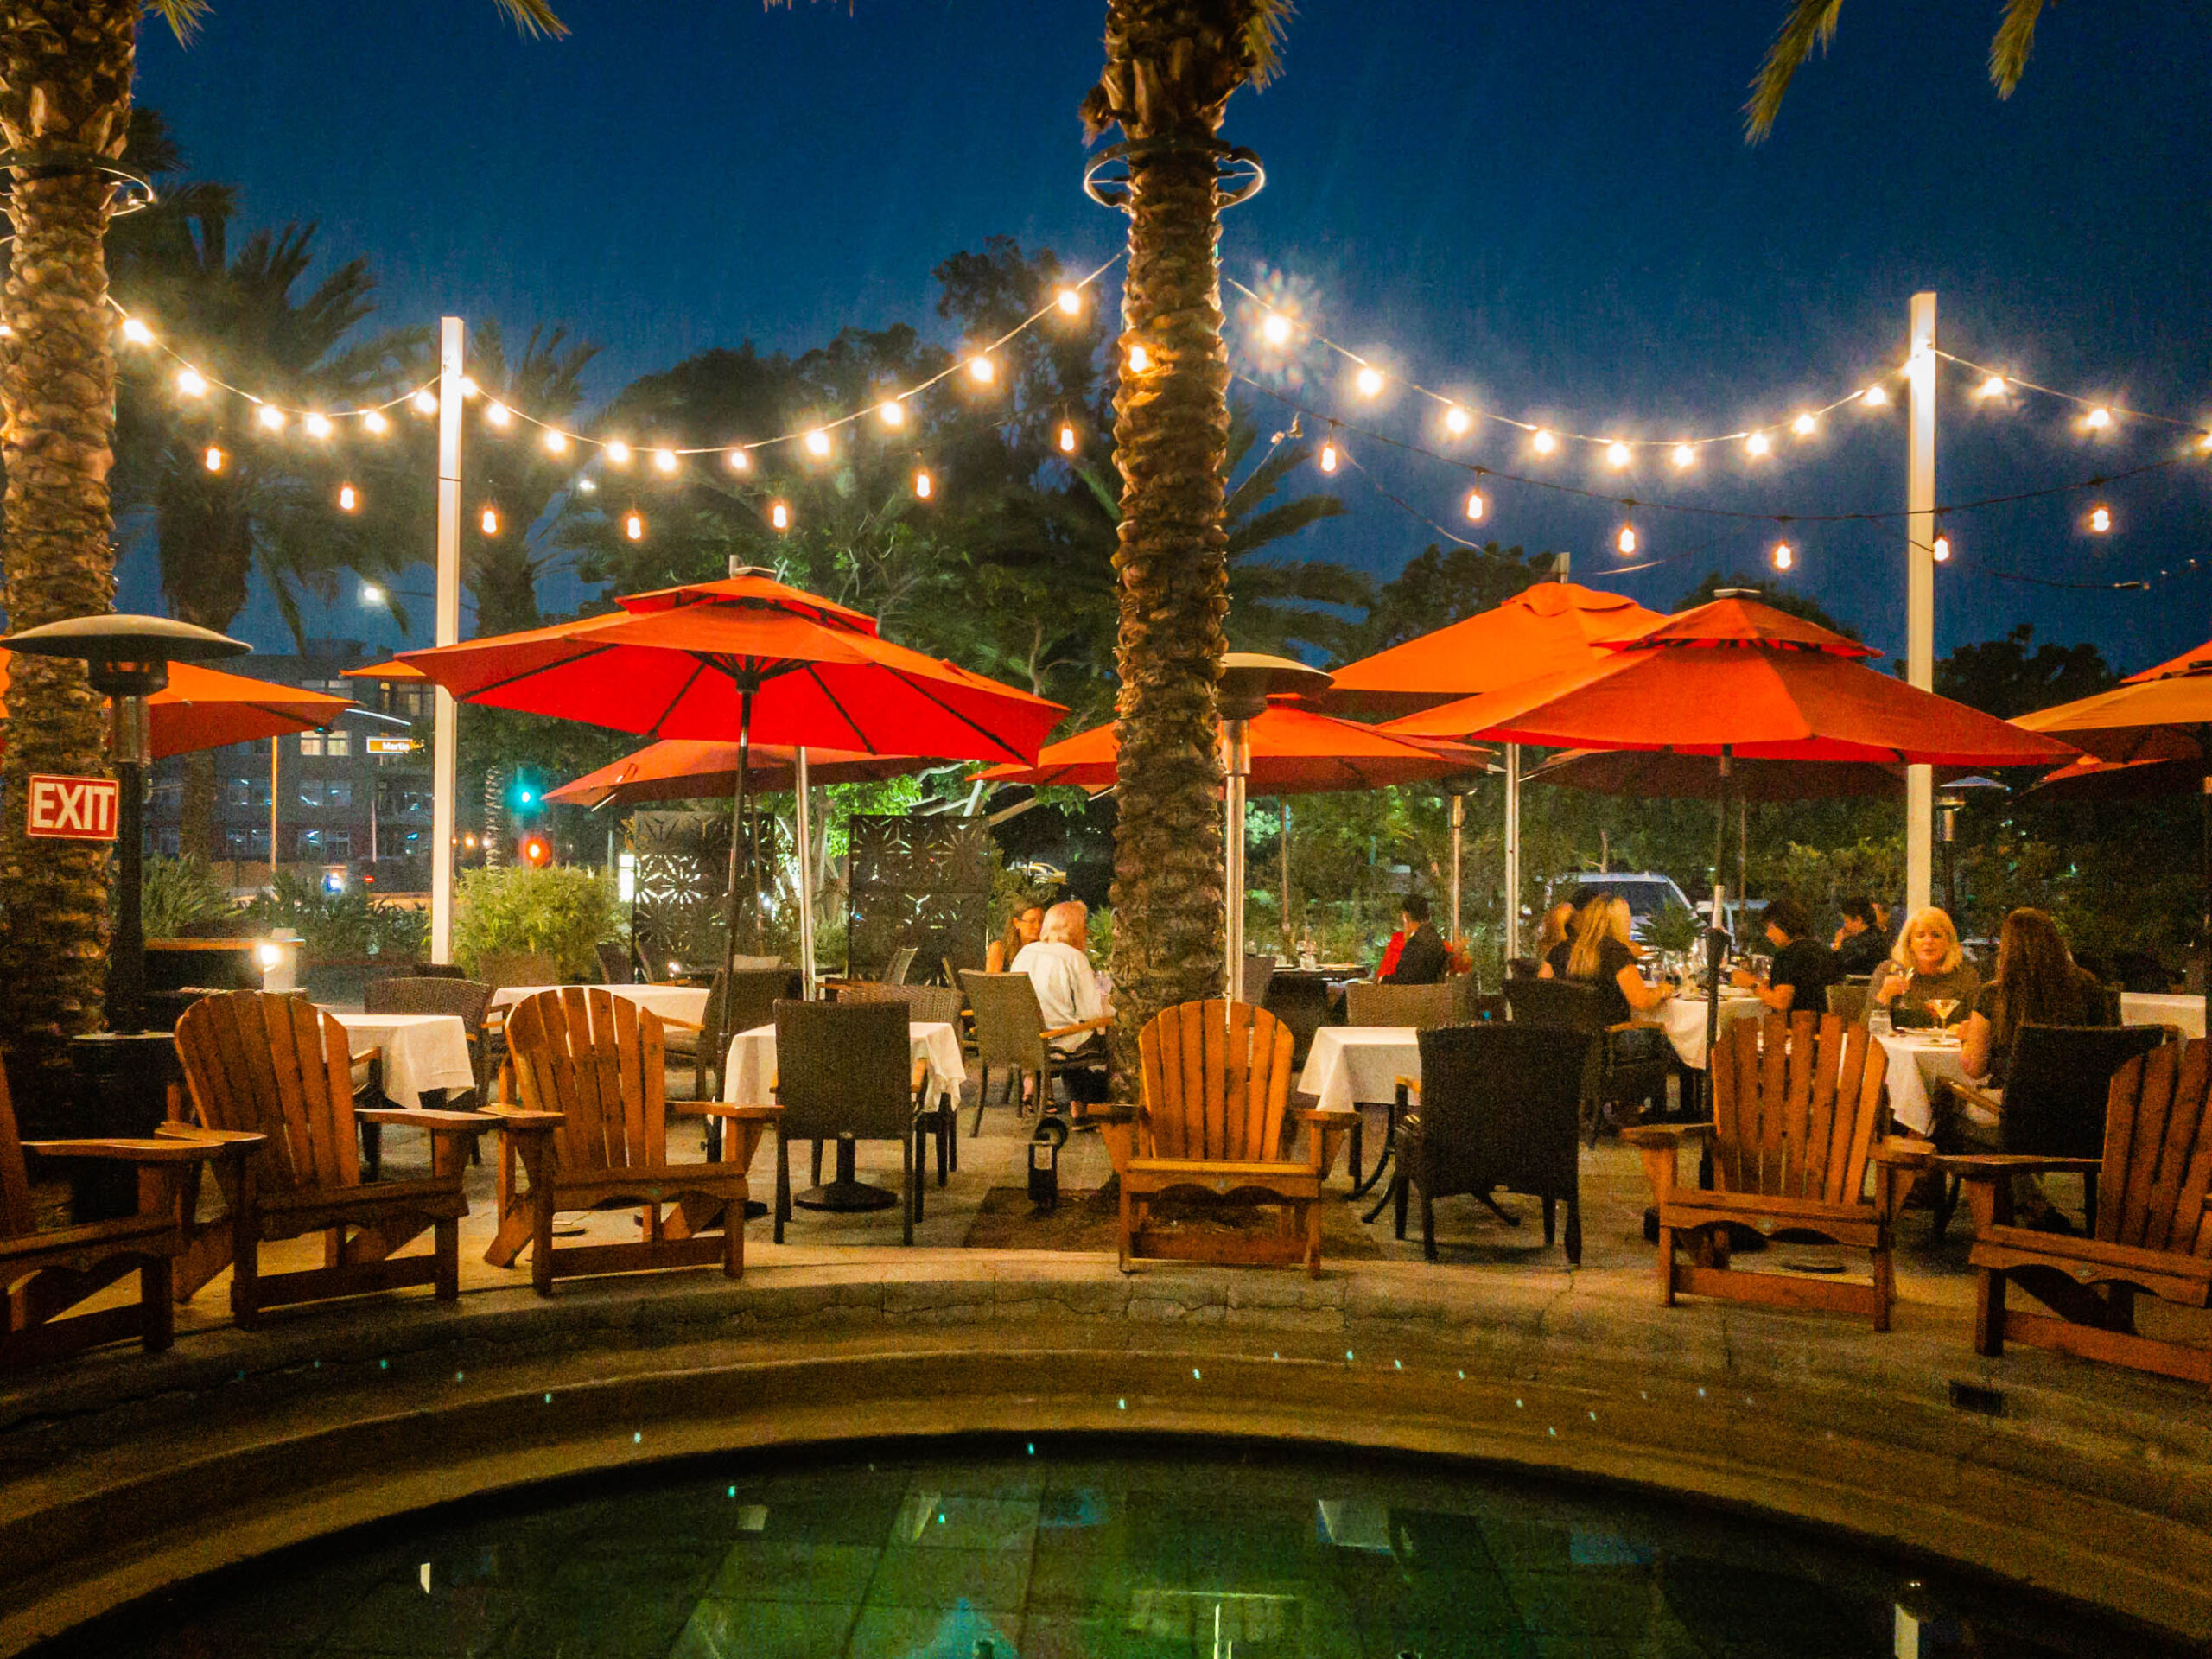 Celebrating Life's Moments - Outdoor Dining's Role in Social Connection